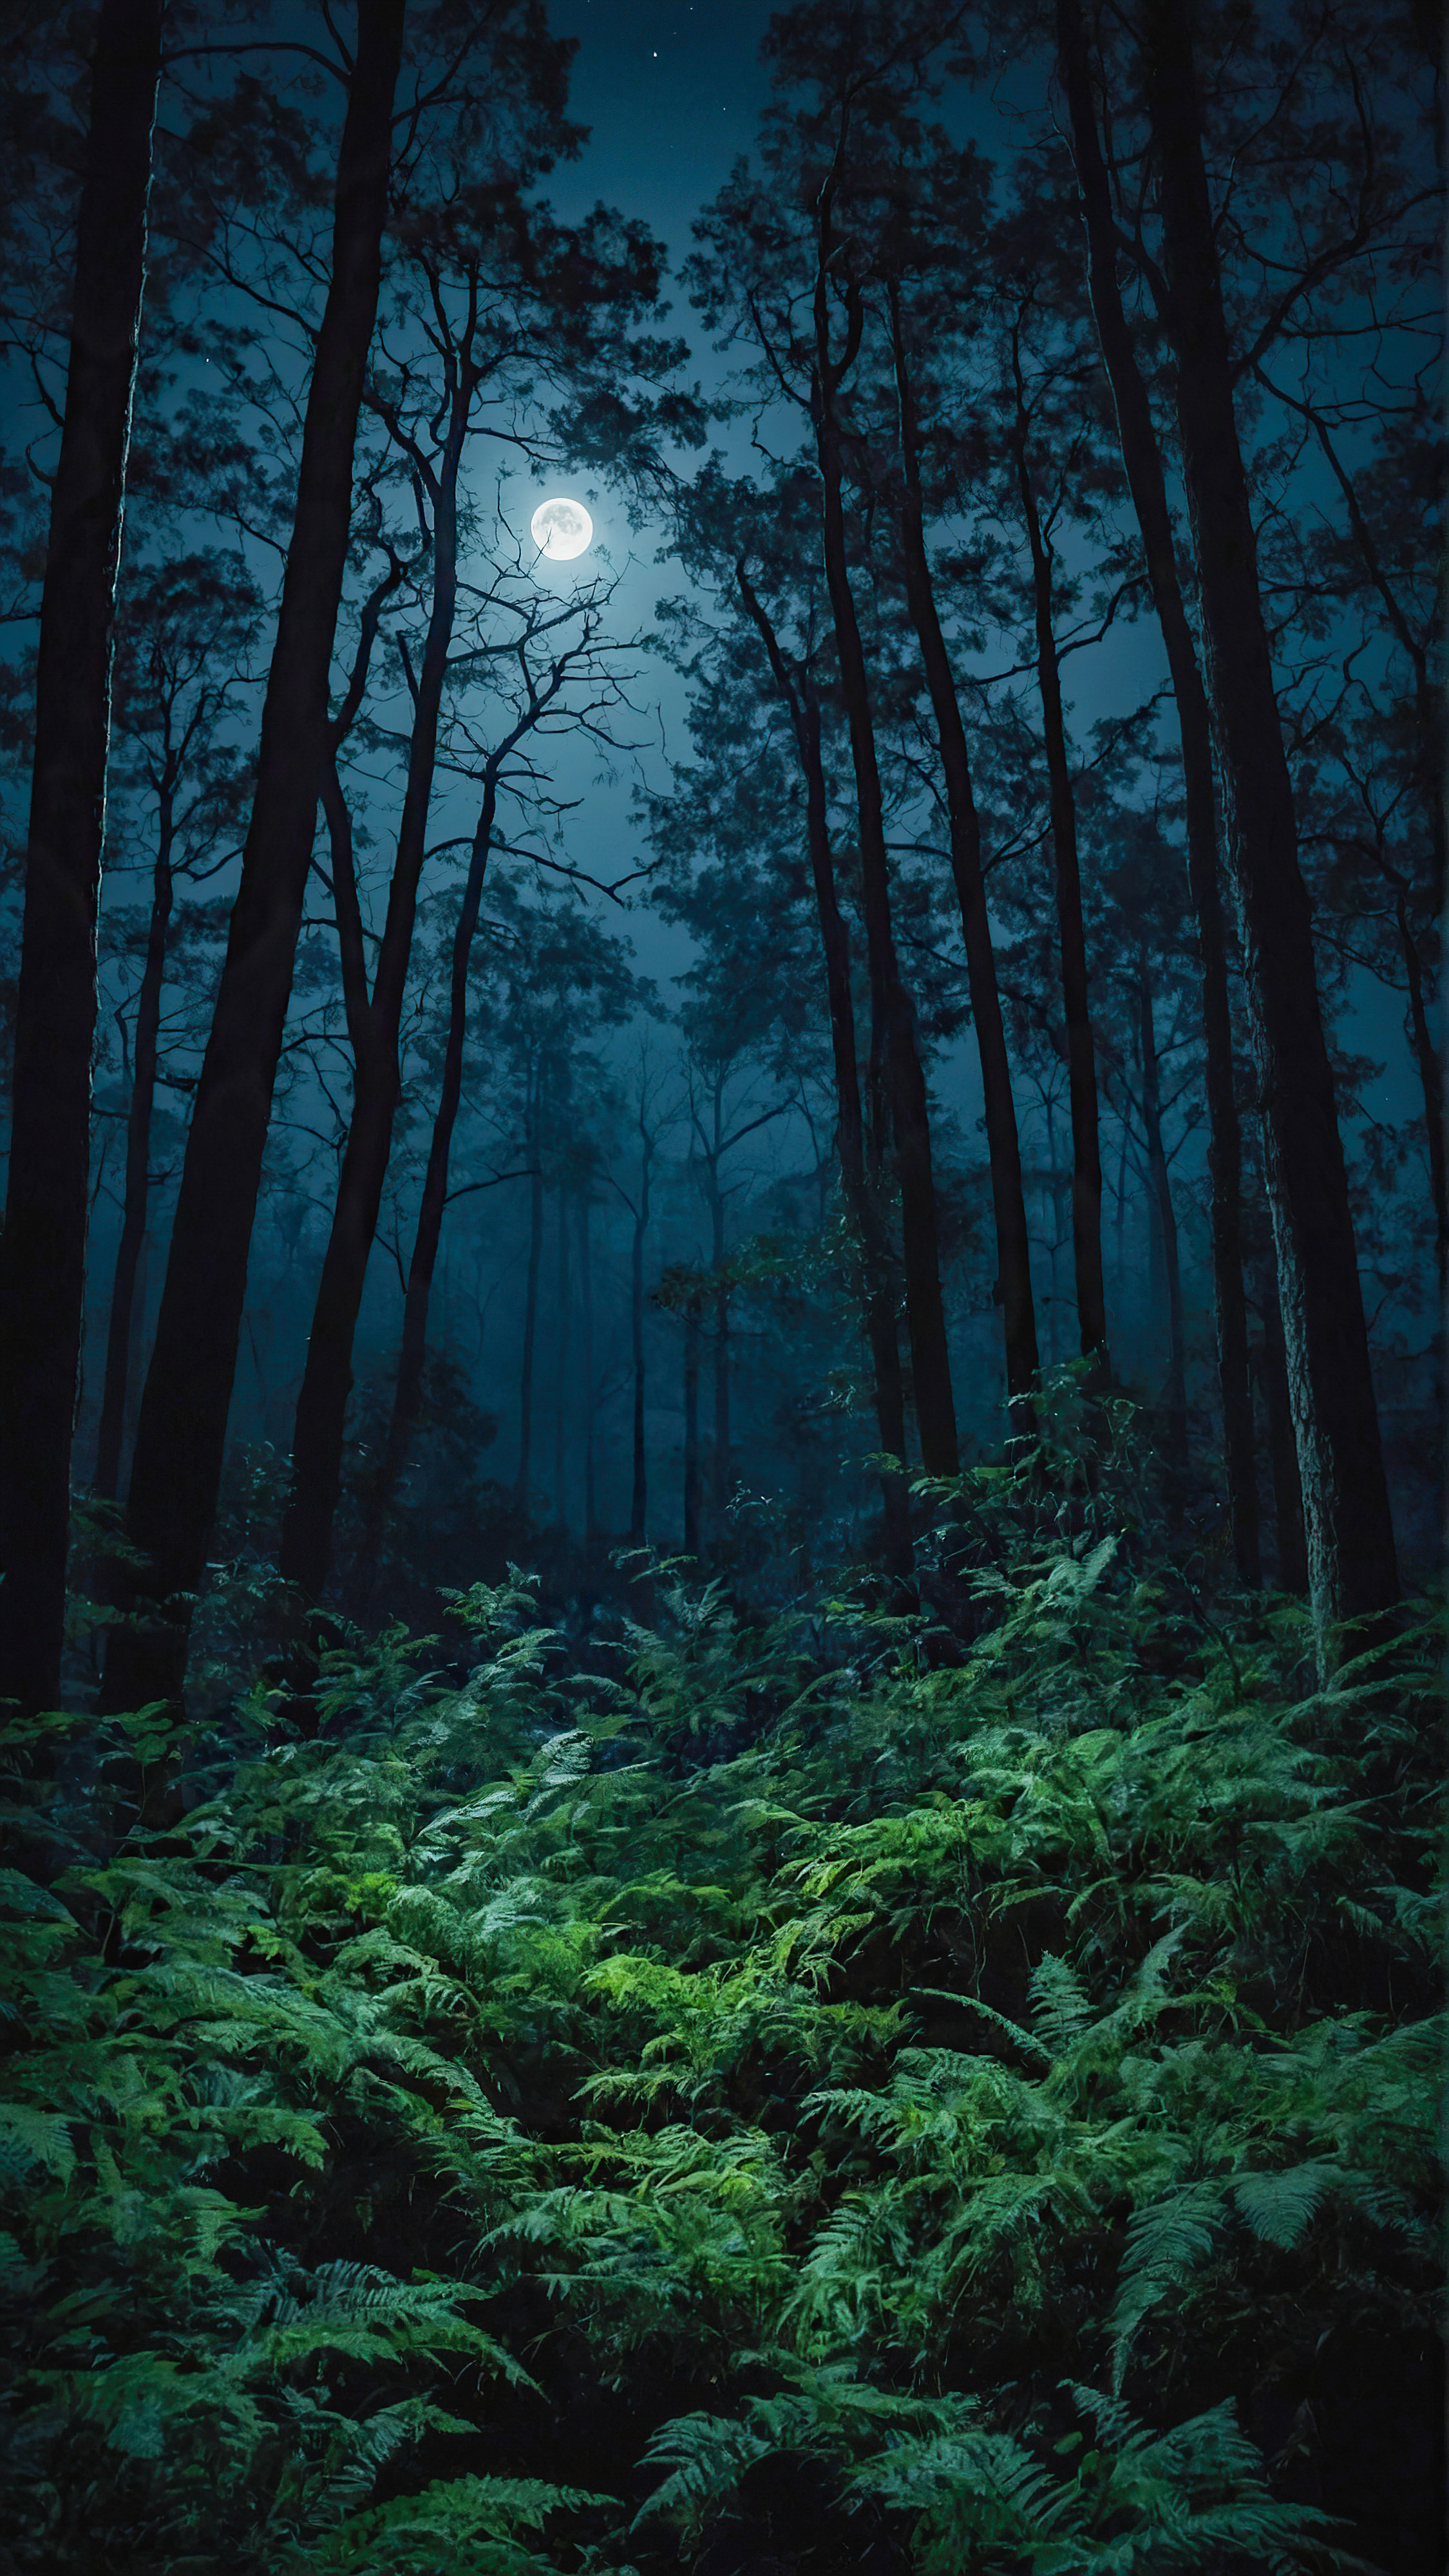 Get mesmerized with our iPhone cool lock screens, showcasing a forest at night, with the moonlight filtering through the dense trees.